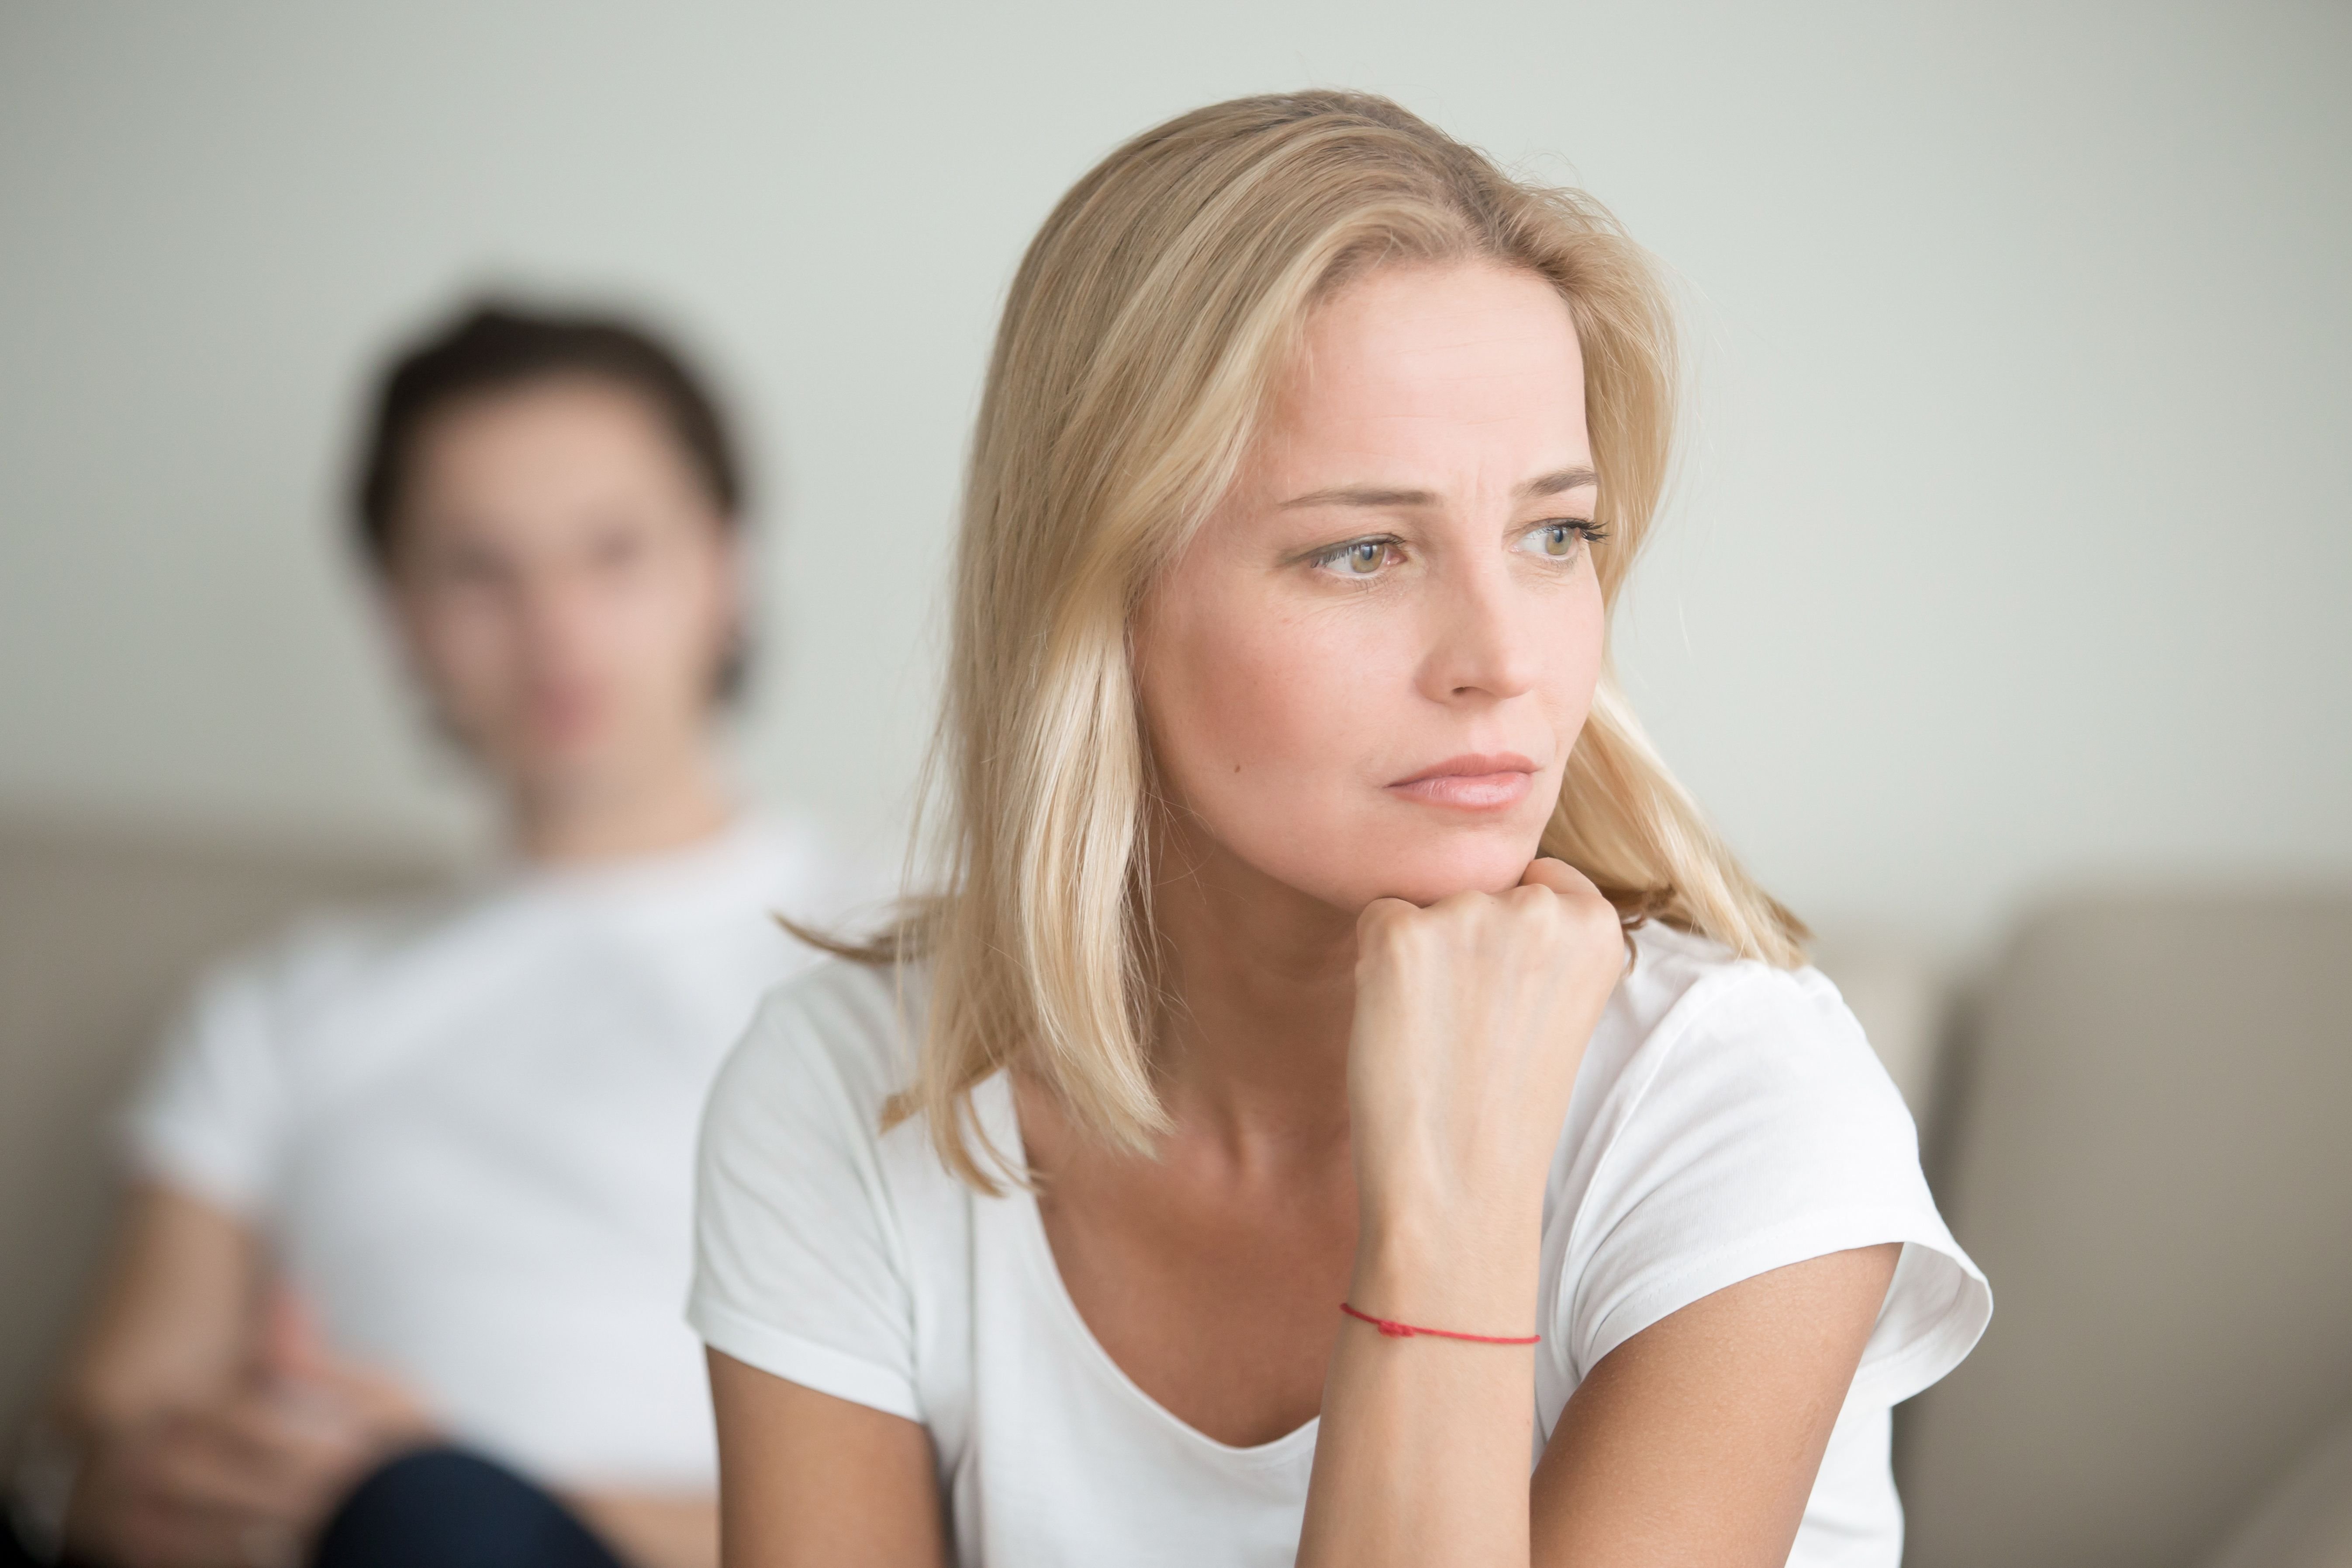 A woman looks upset while a man sits behind her. | Source: Shutterstock